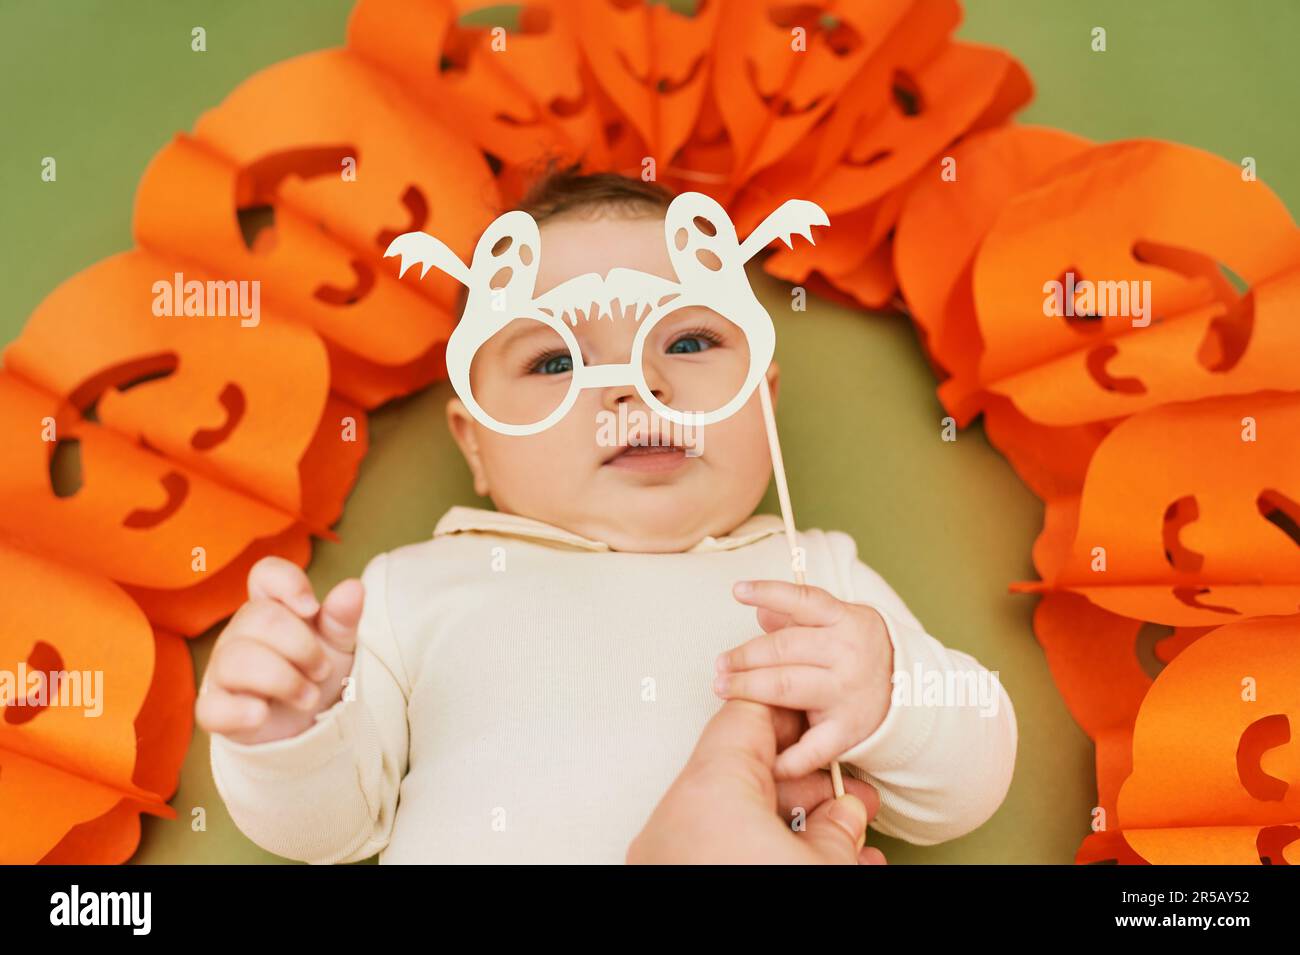 Halloween portrait of adorable baby lying on green background next to pumpkin garland, holding ghost paper glasses for photo booth Stock Photo